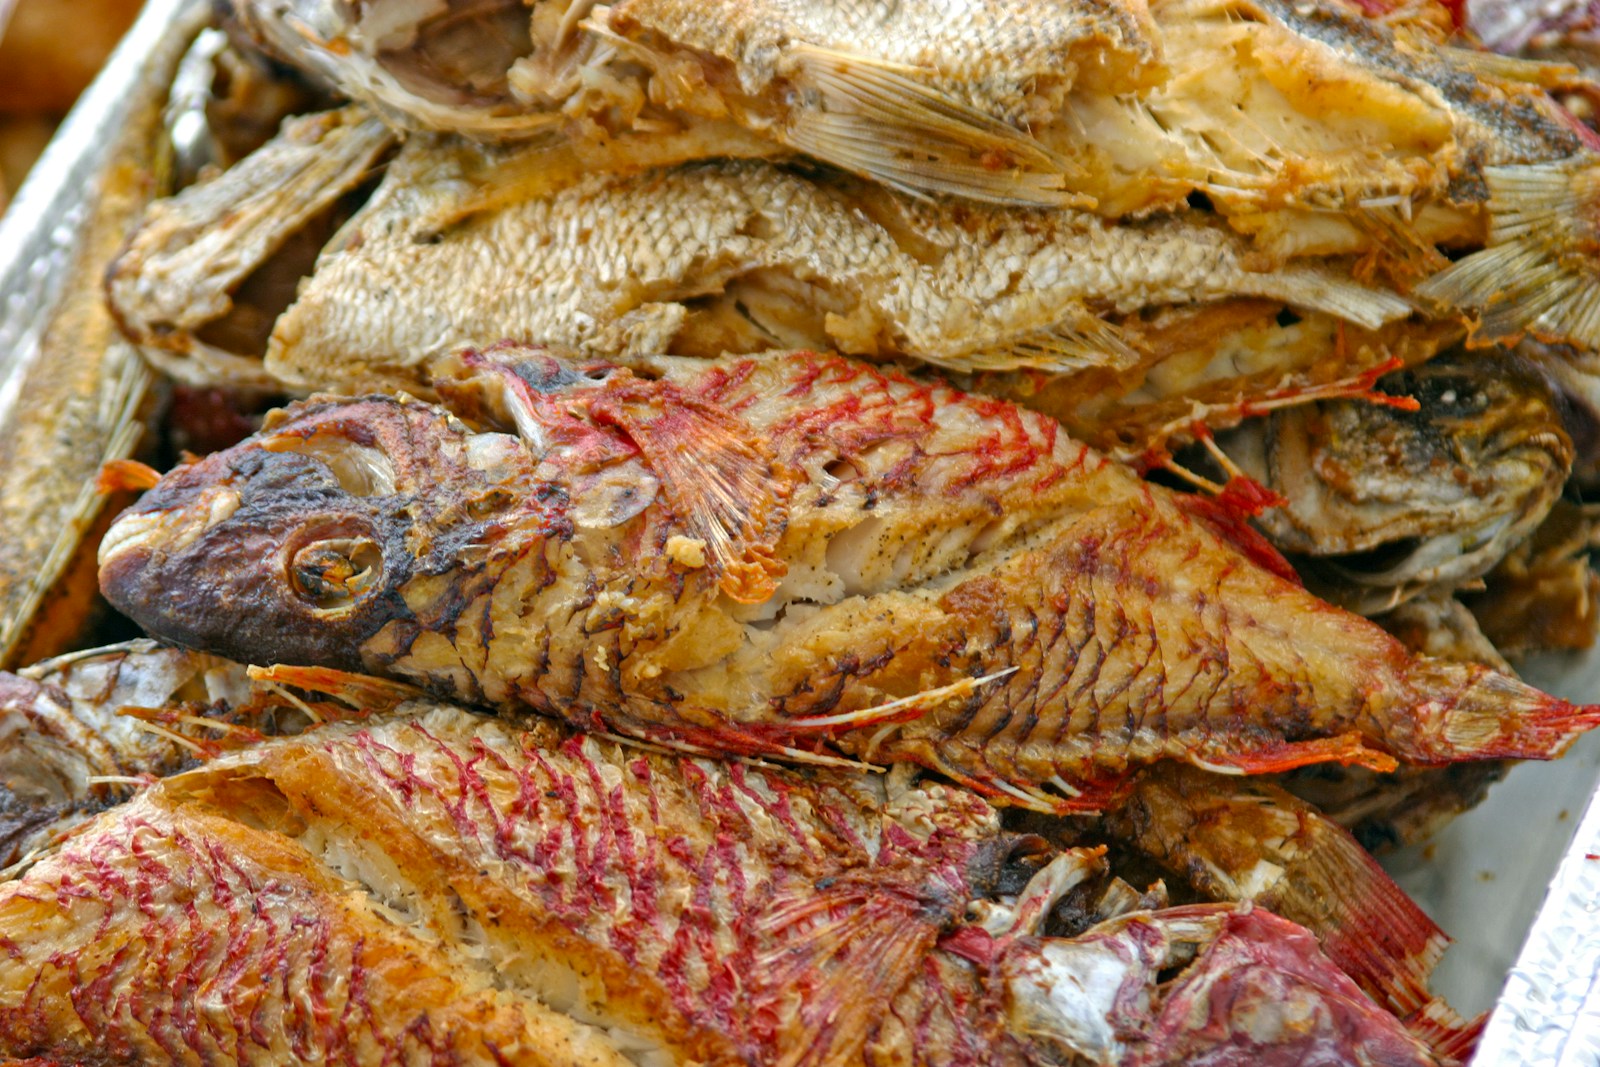 Most Stunning Valuable Health of Fish Meat.